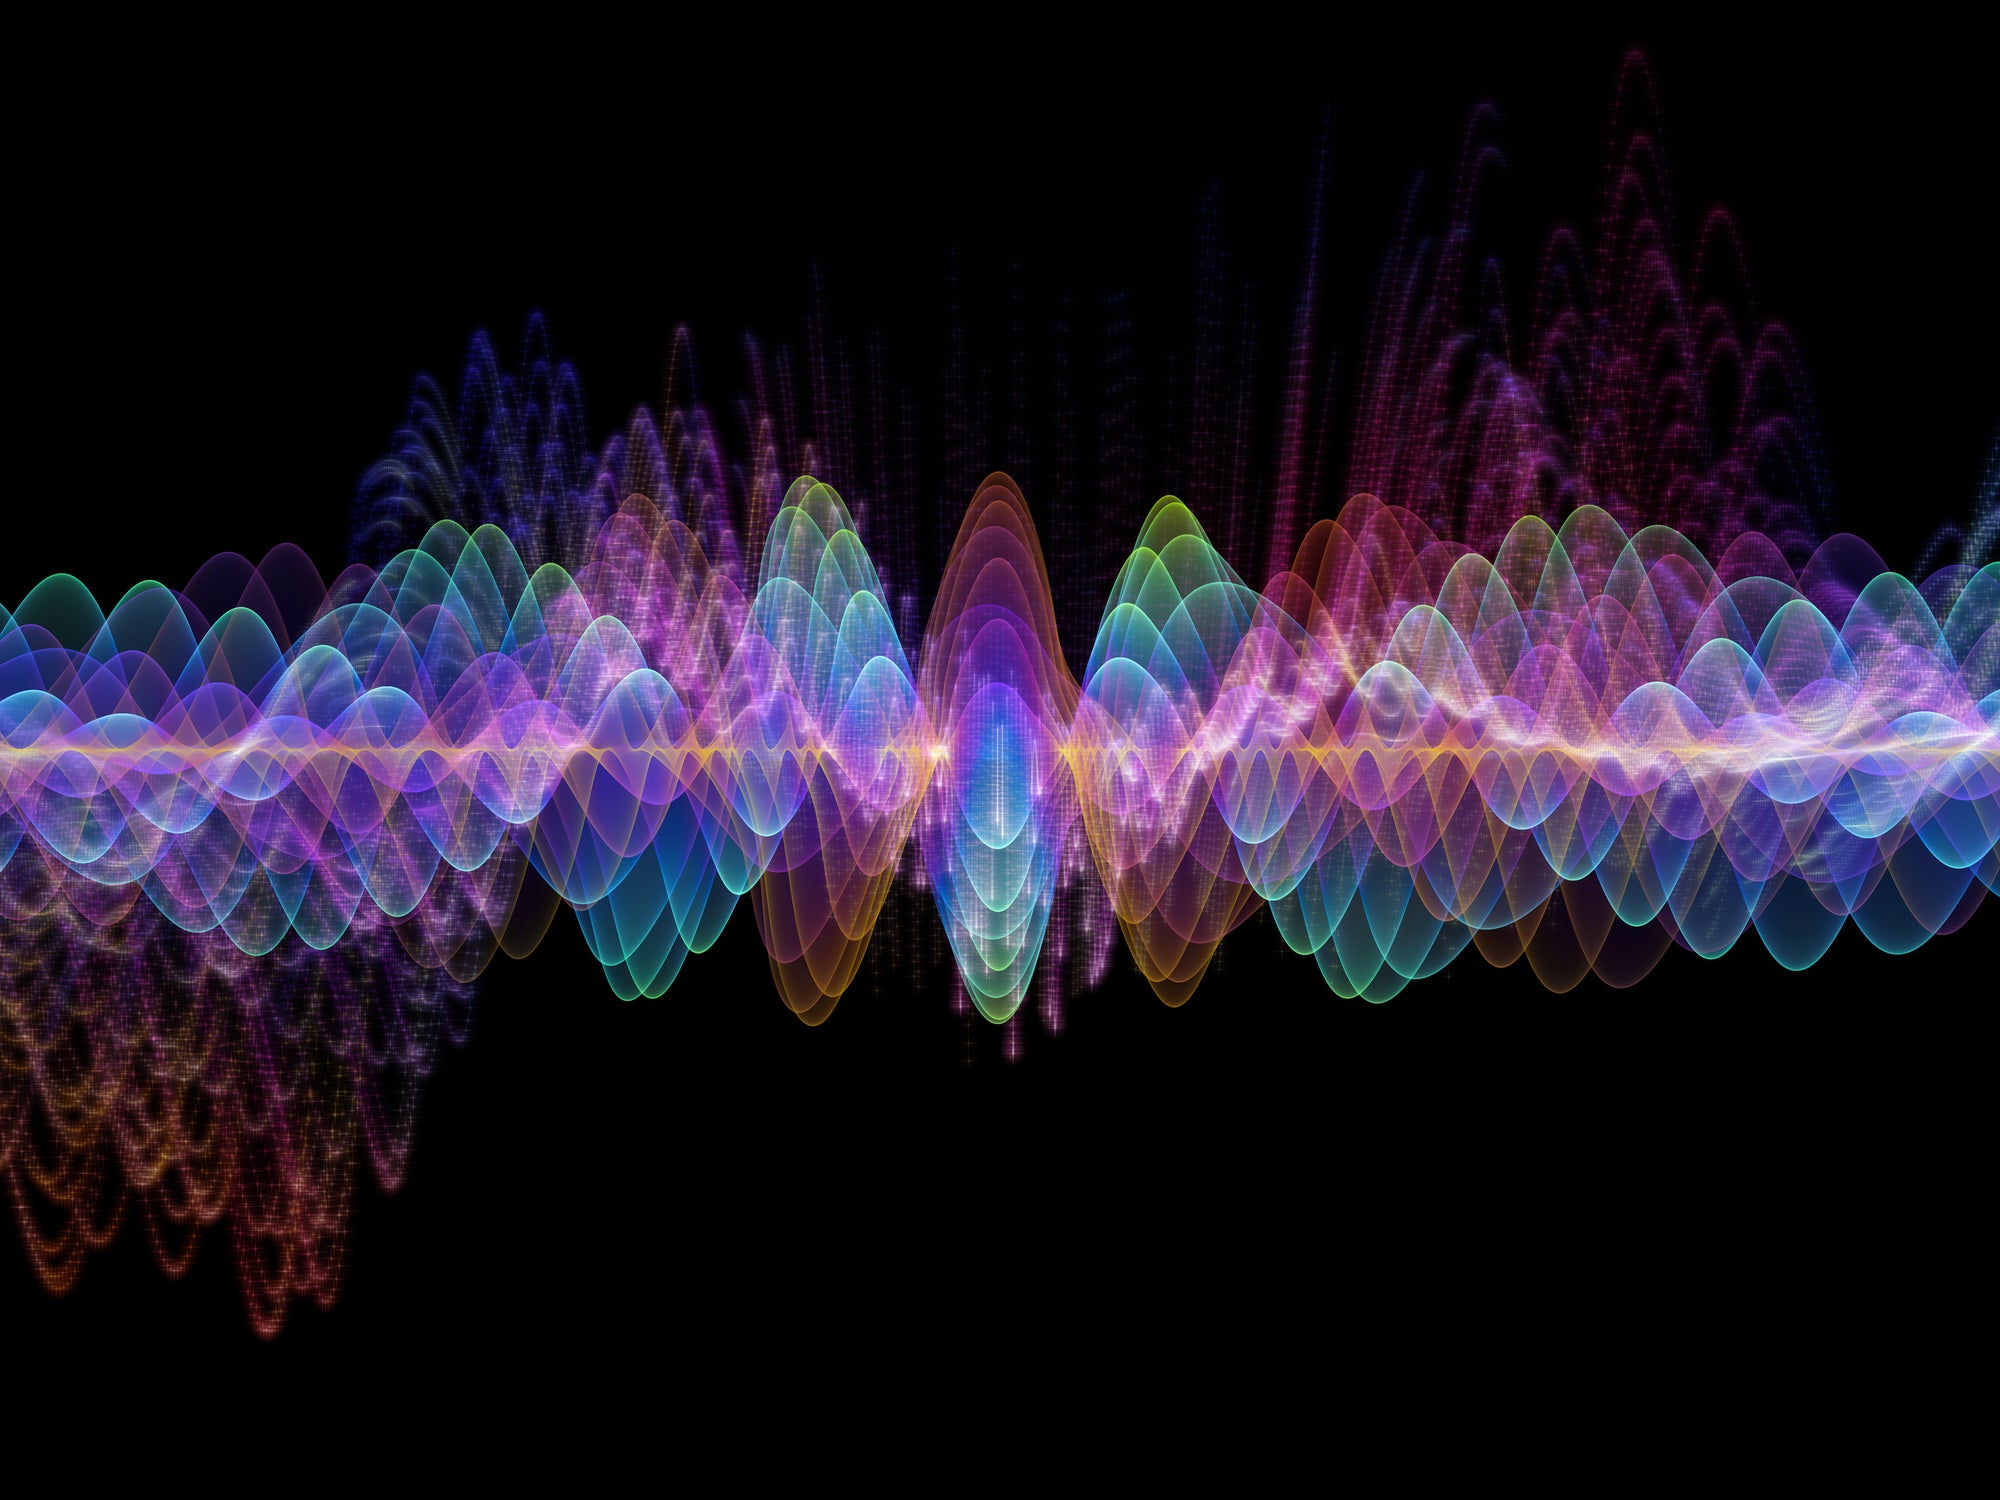 A colorful sound wave on a black background.